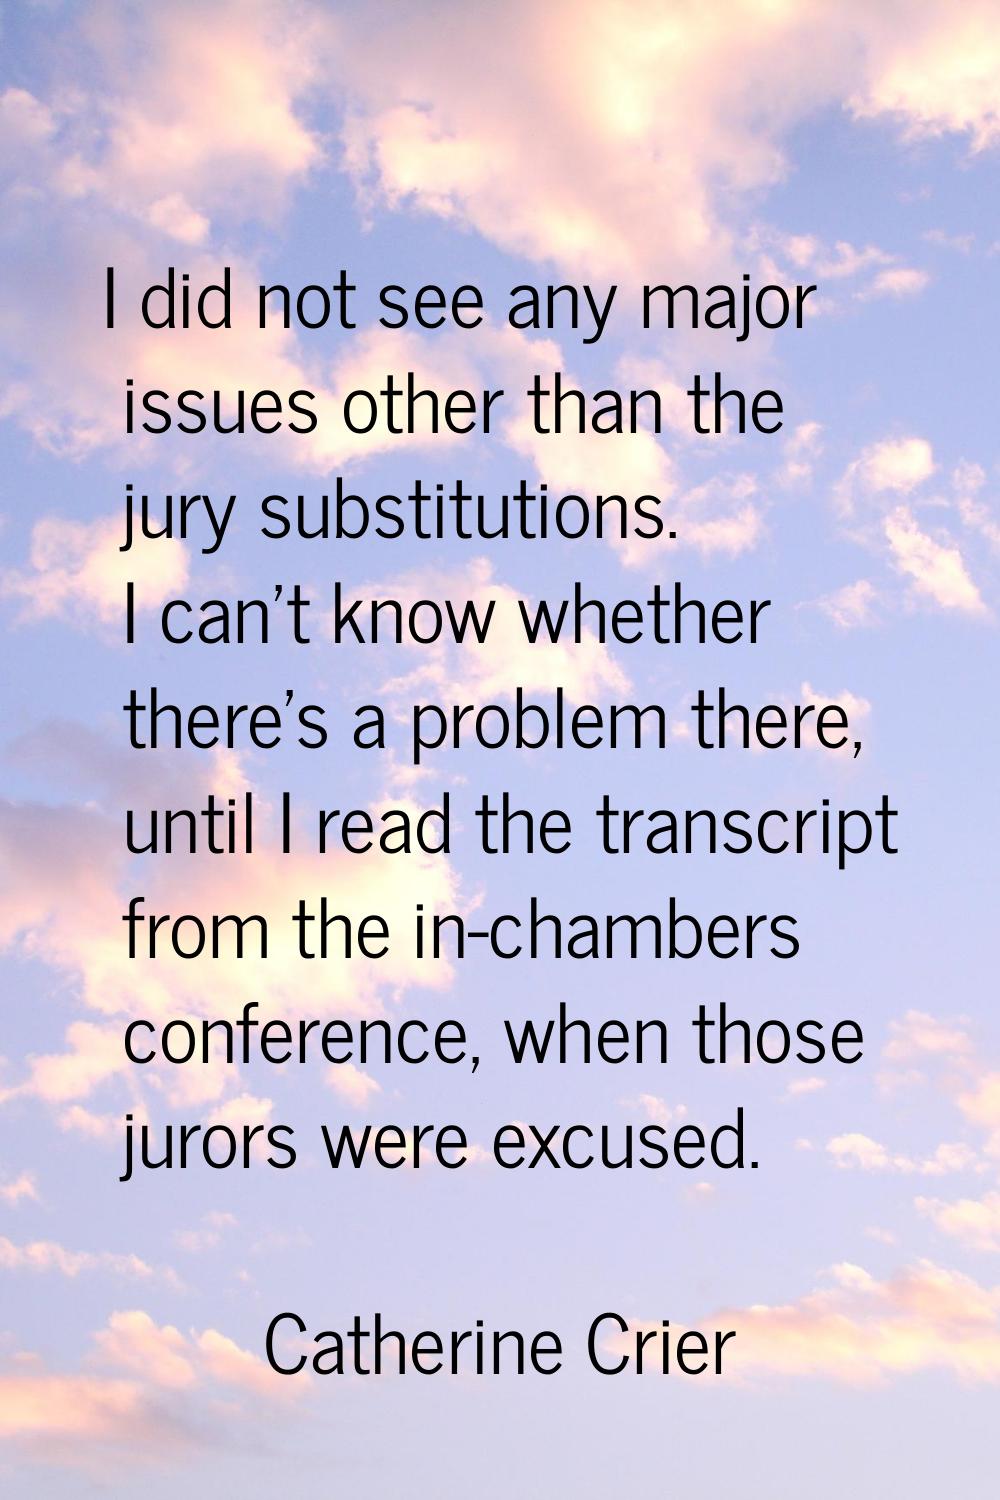 I did not see any major issues other than the jury substitutions. I can't know whether there's a pr